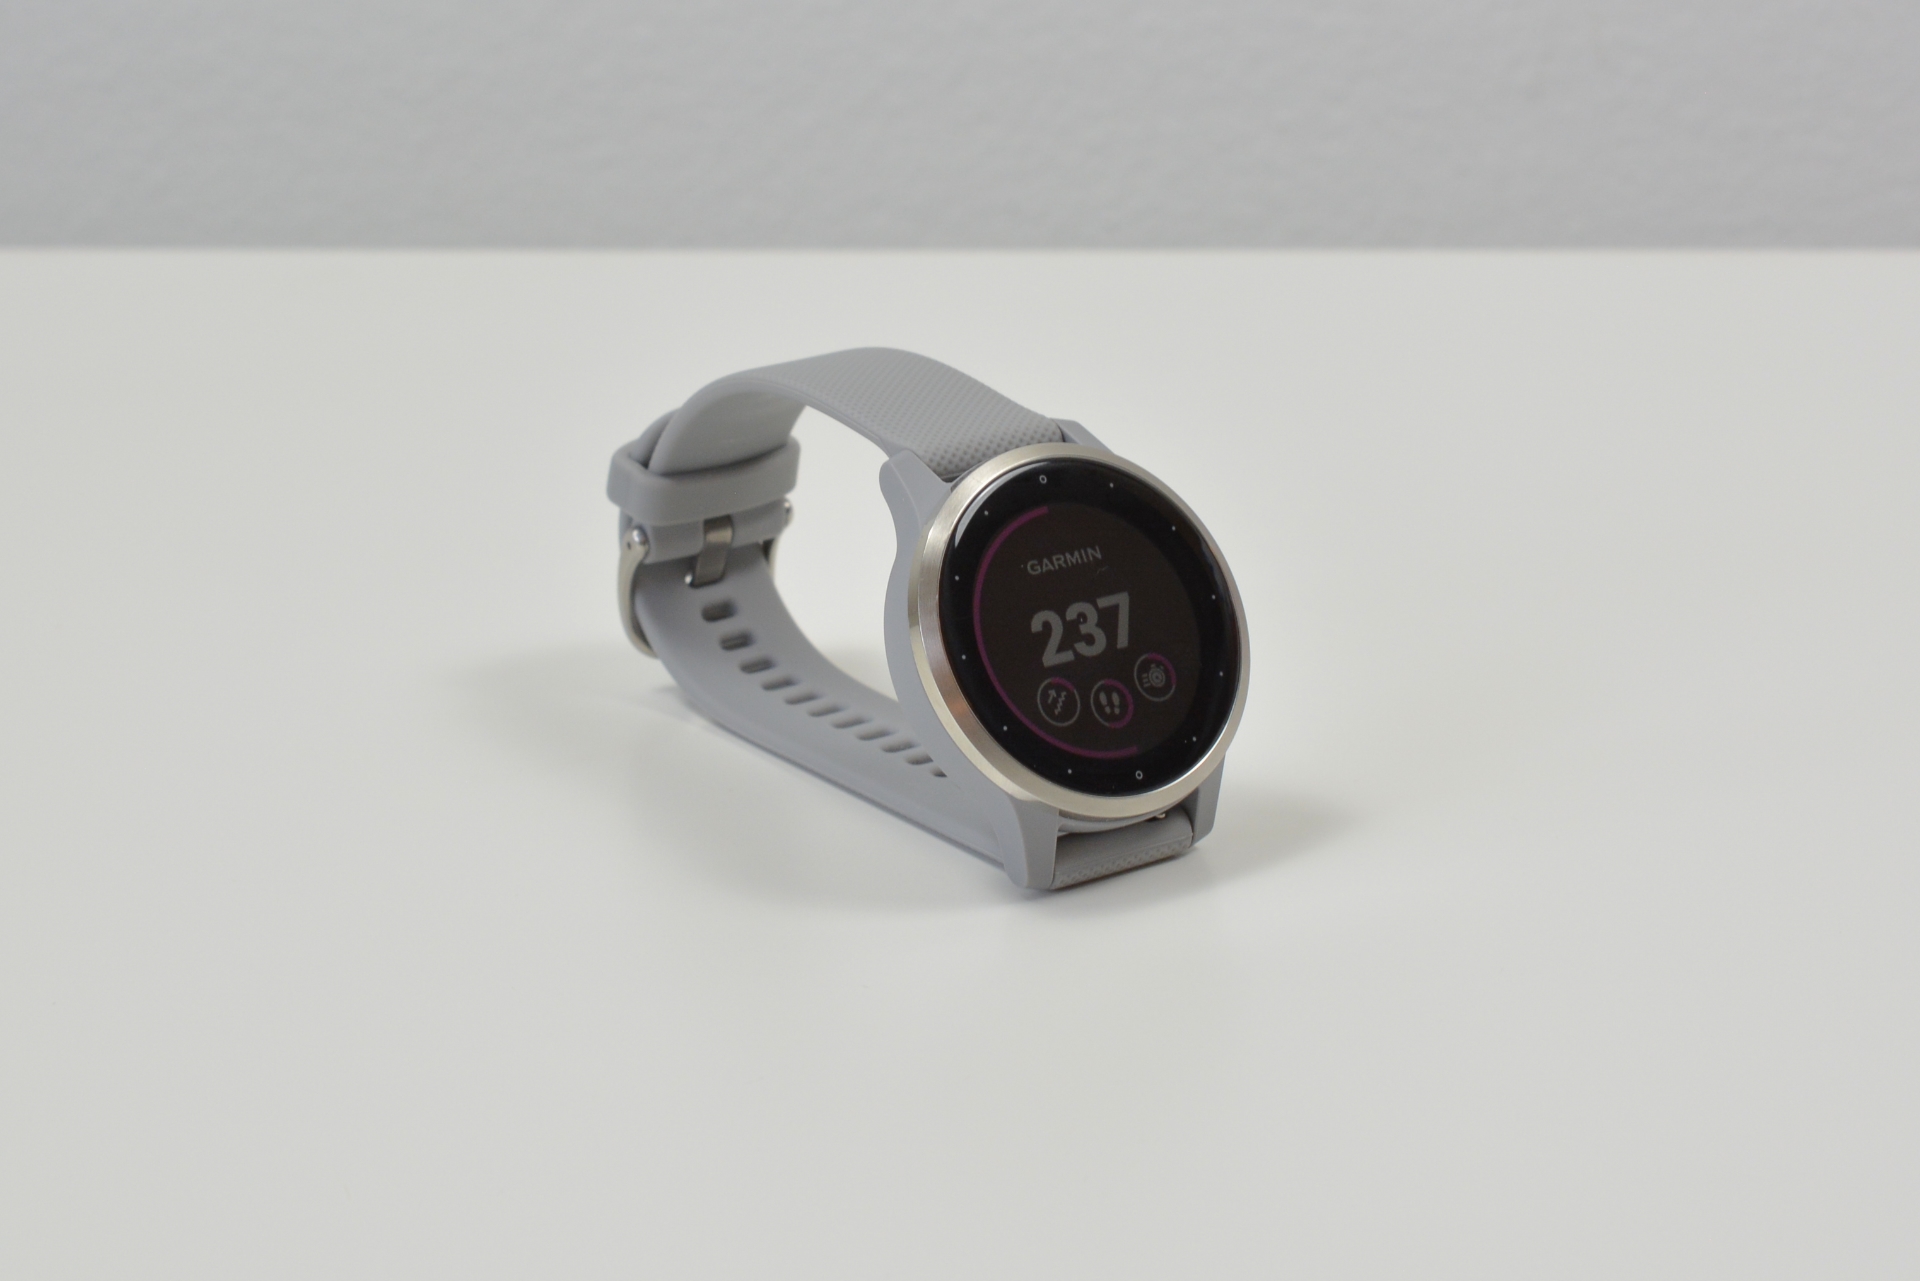 Garmin Vivoactive 4s review: So many fitness features, so little time